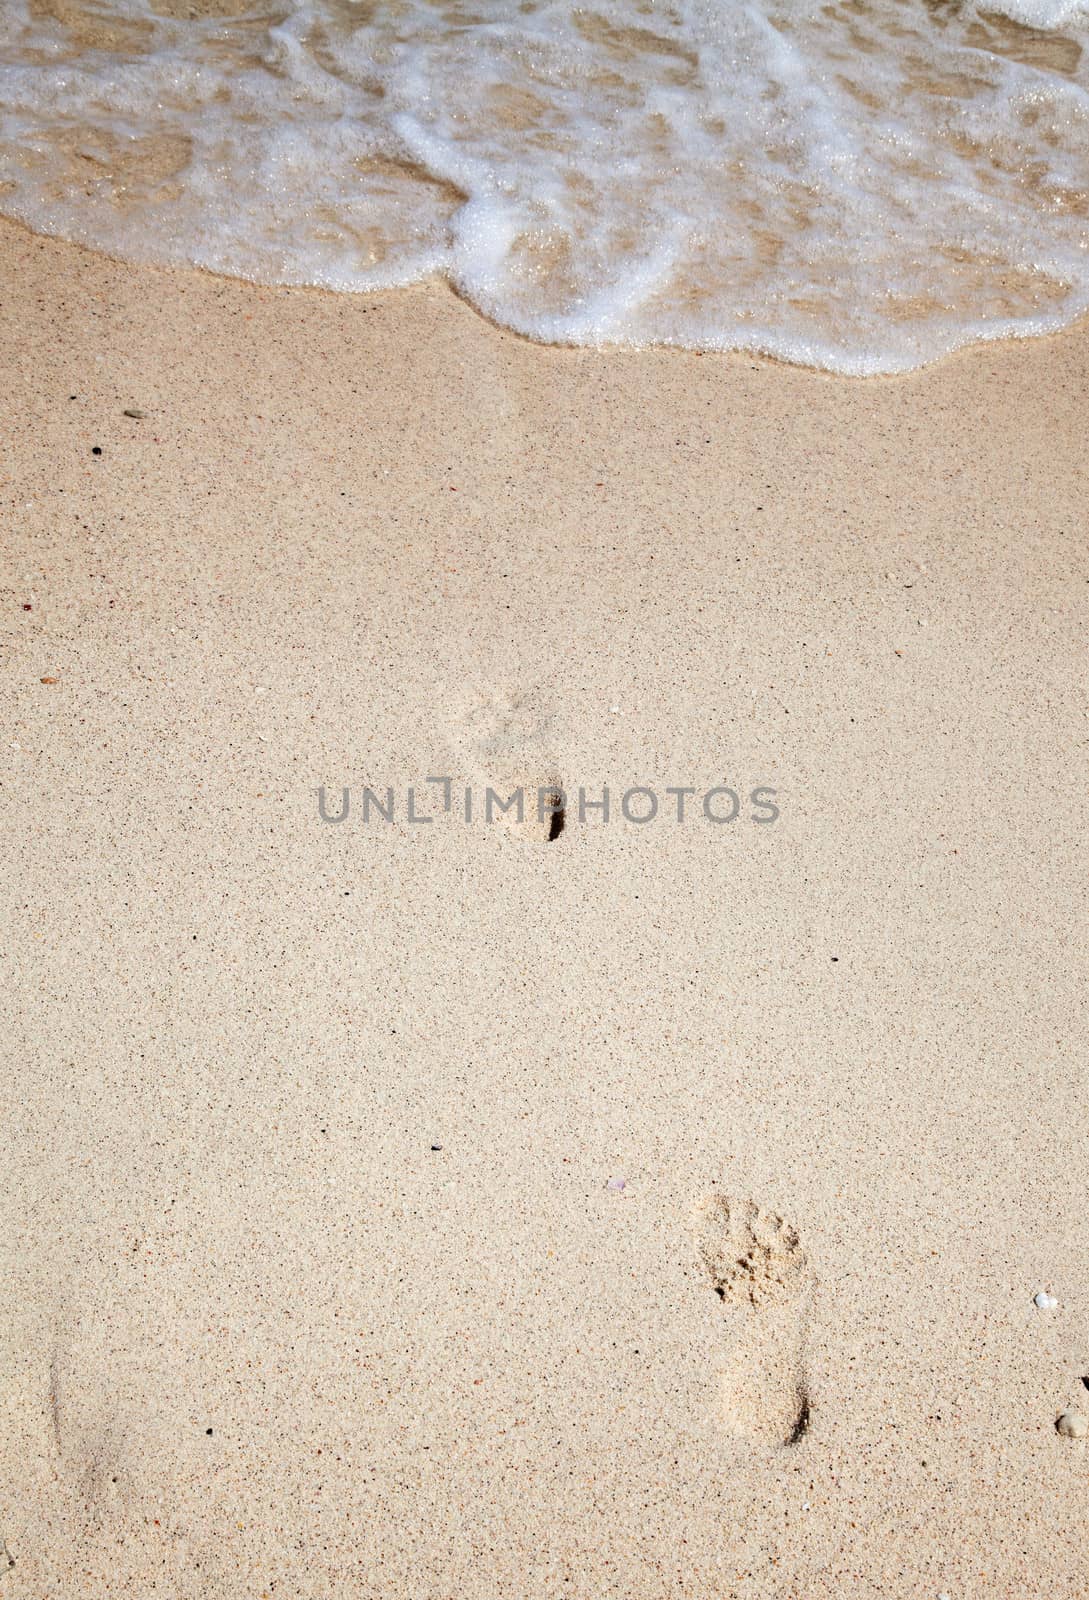 Footsteps on sand by swisshippo